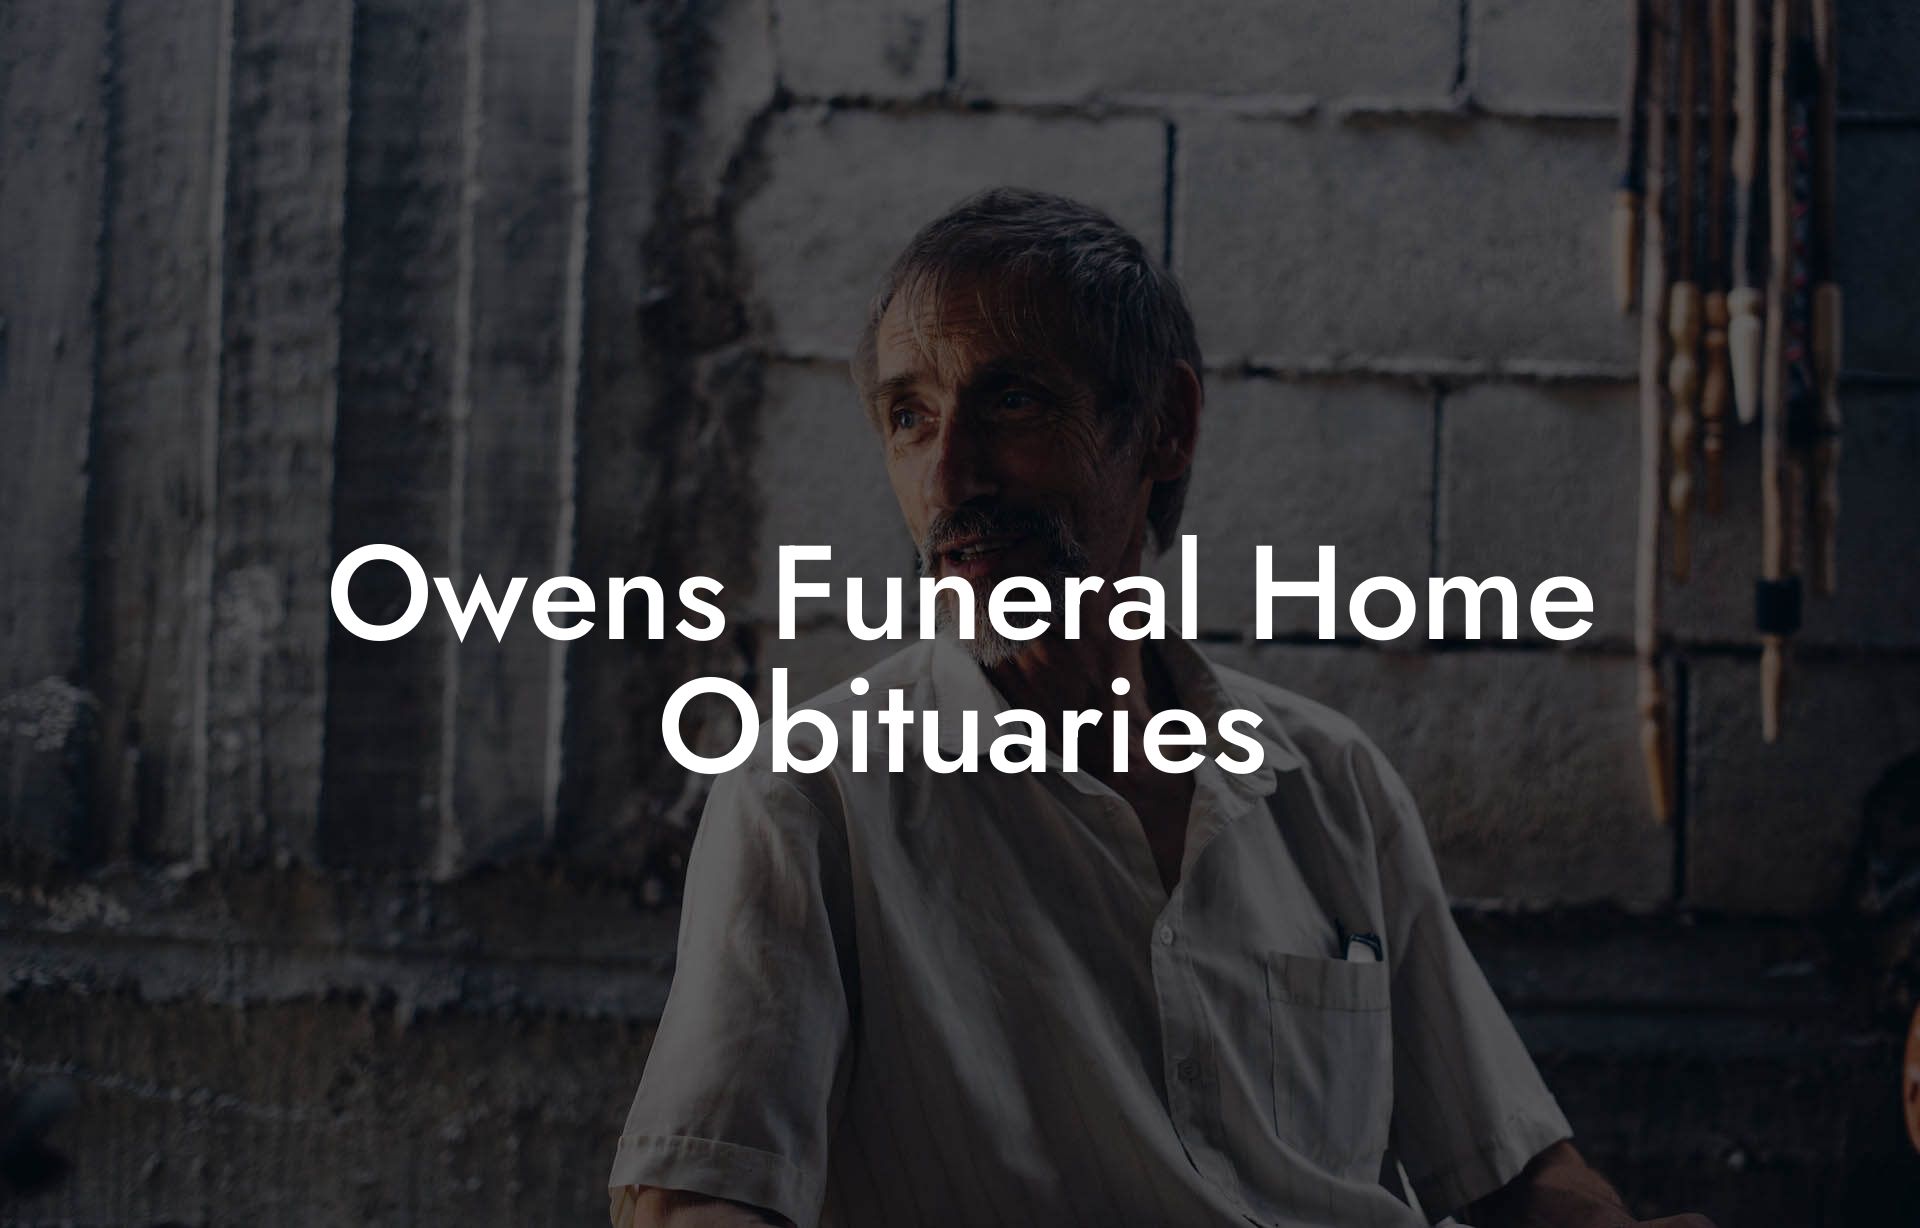 Owens Funeral Home Obituaries